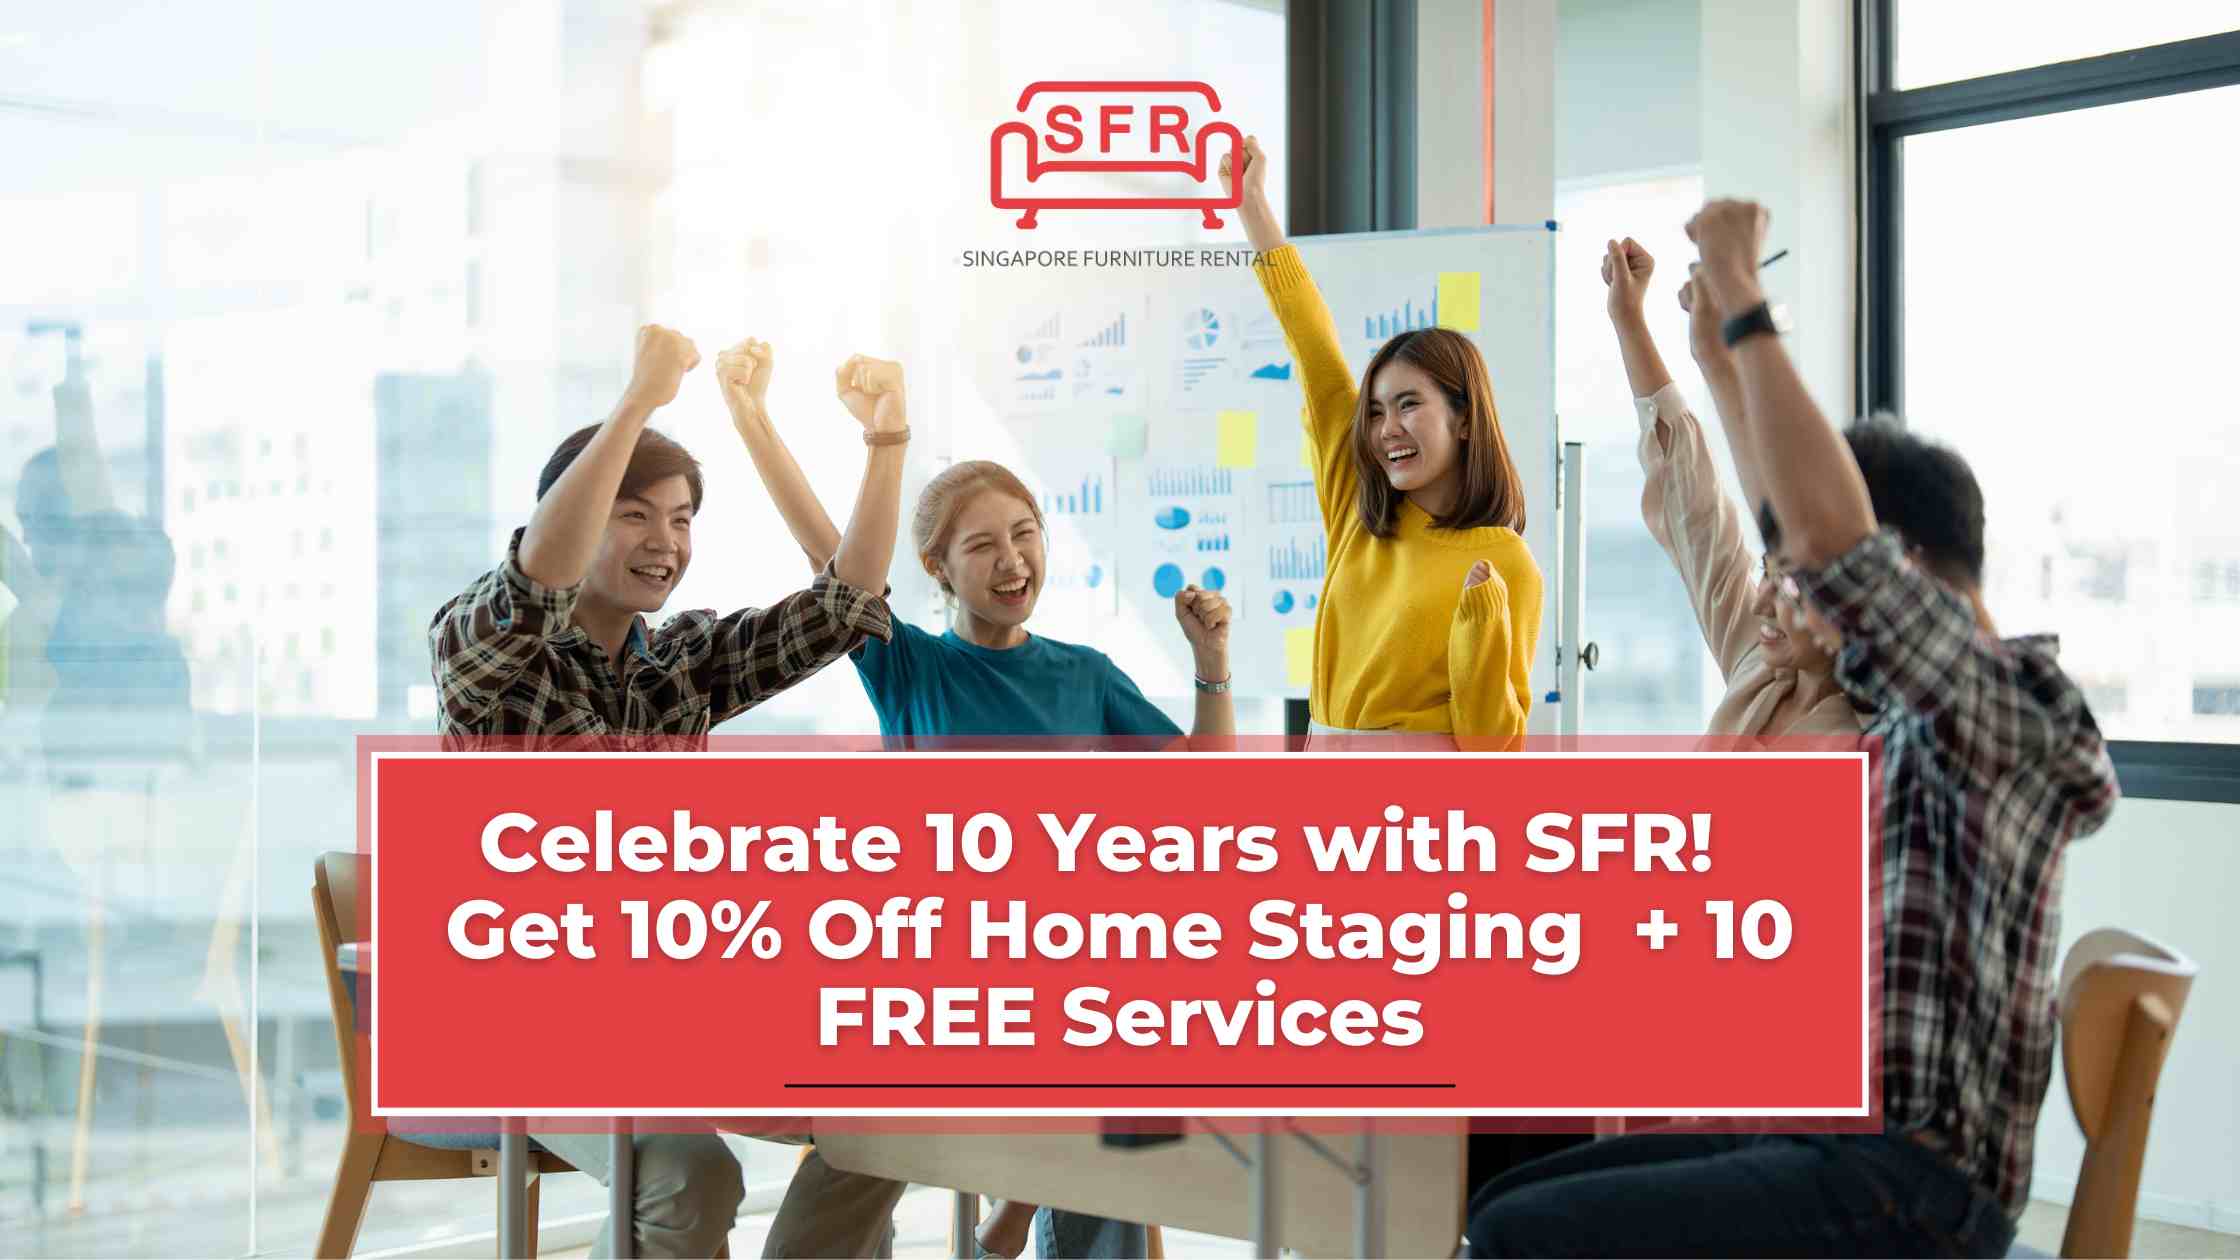 Celebrate 10 Years with SFR! Get 10% Off Home Staging + 10 FREE Services